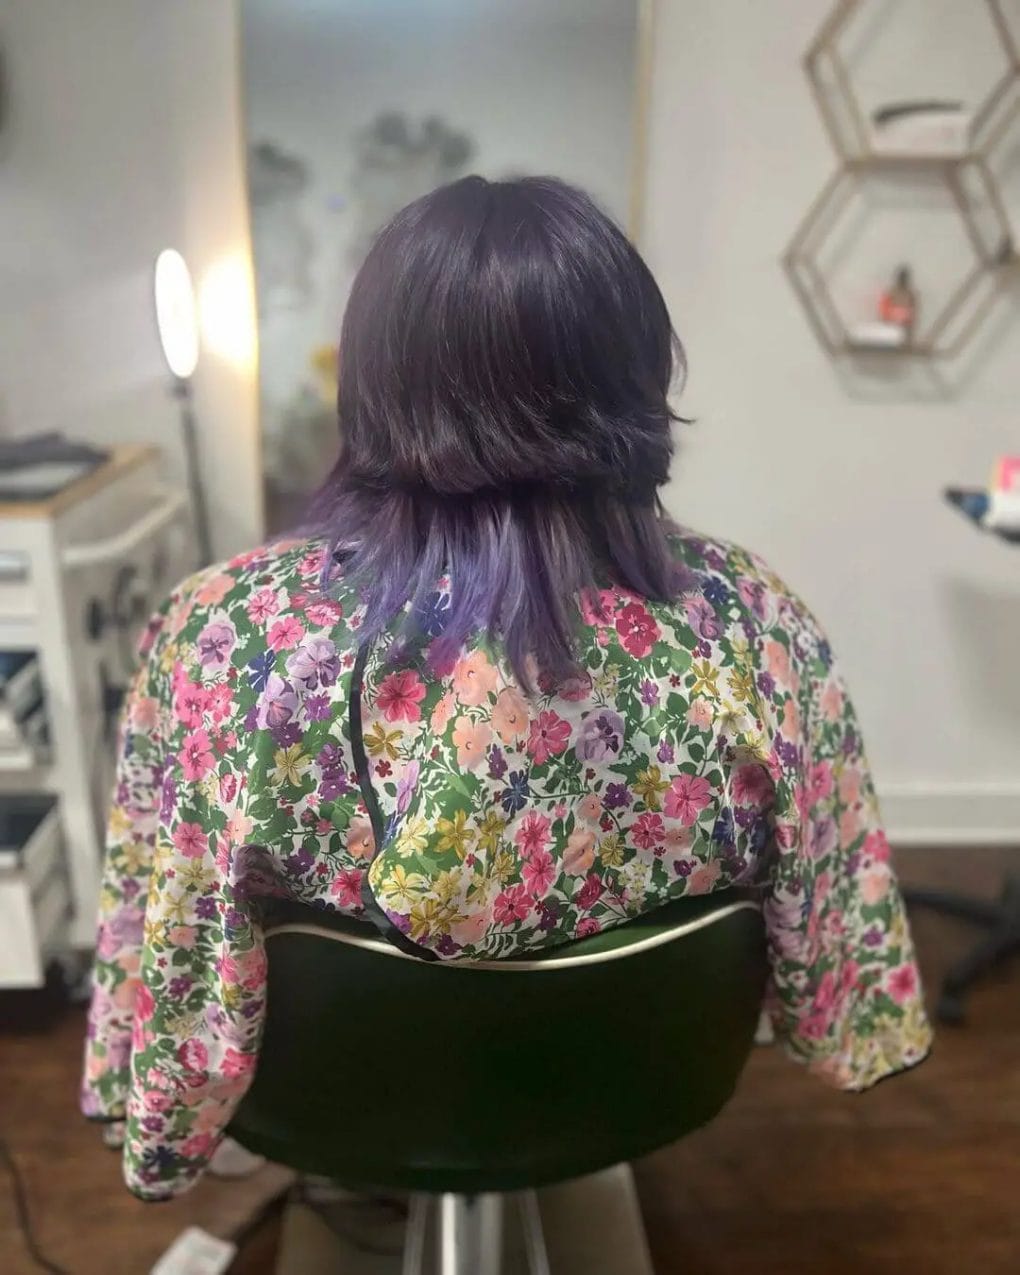 Serenely elegant jellyfish haircut with cascading dark purple layers and subtle waves.